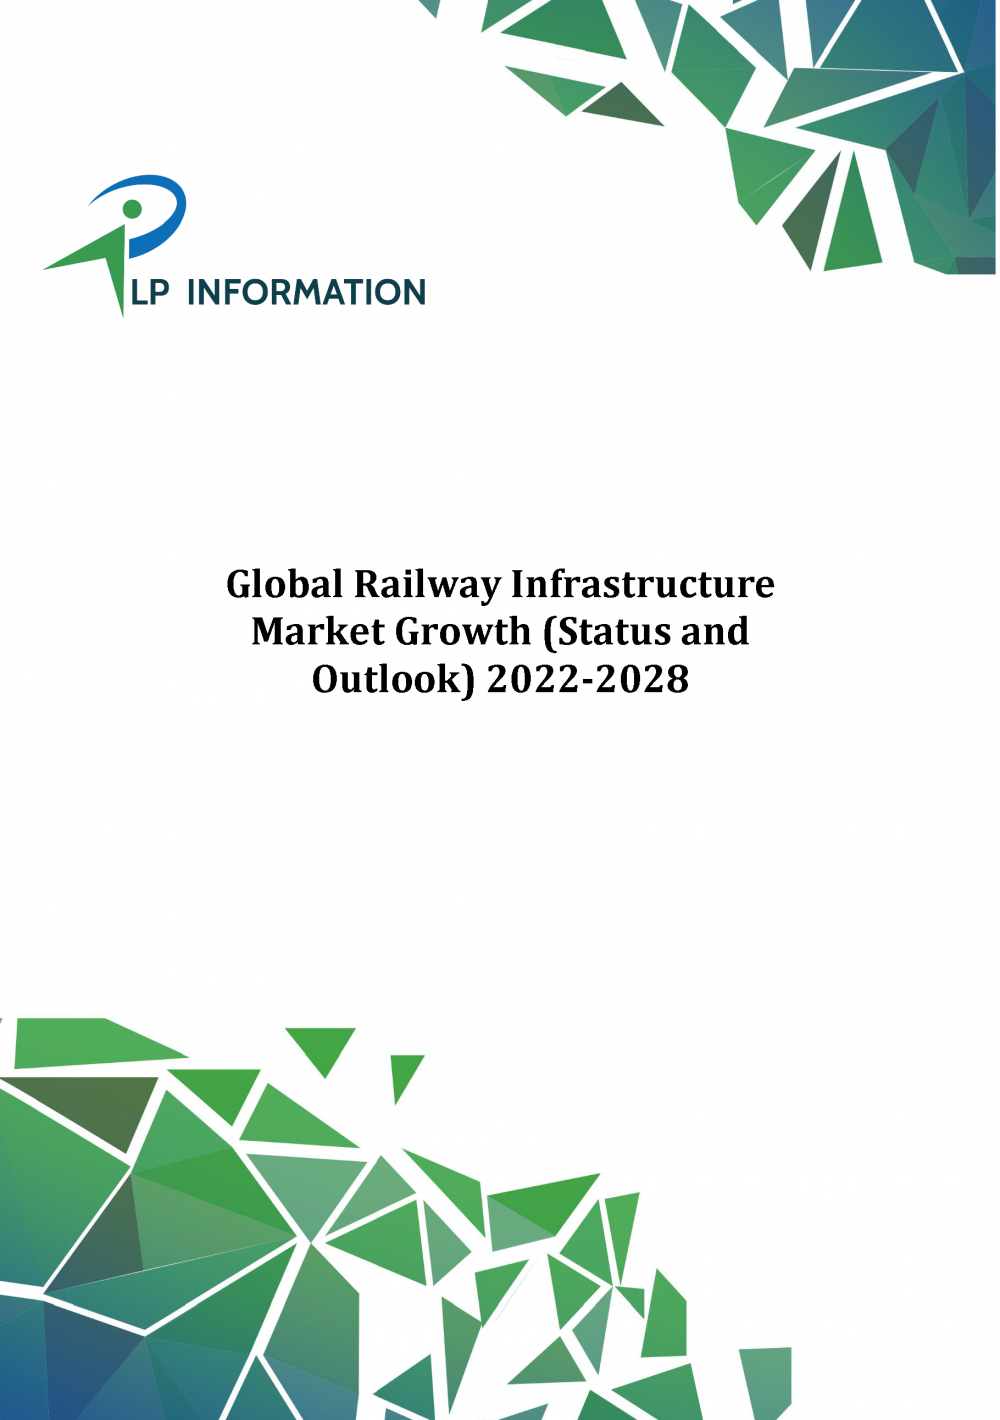 Global Railway Infrastructure Market Growth (Status and Outlook) 2022-2028_cover